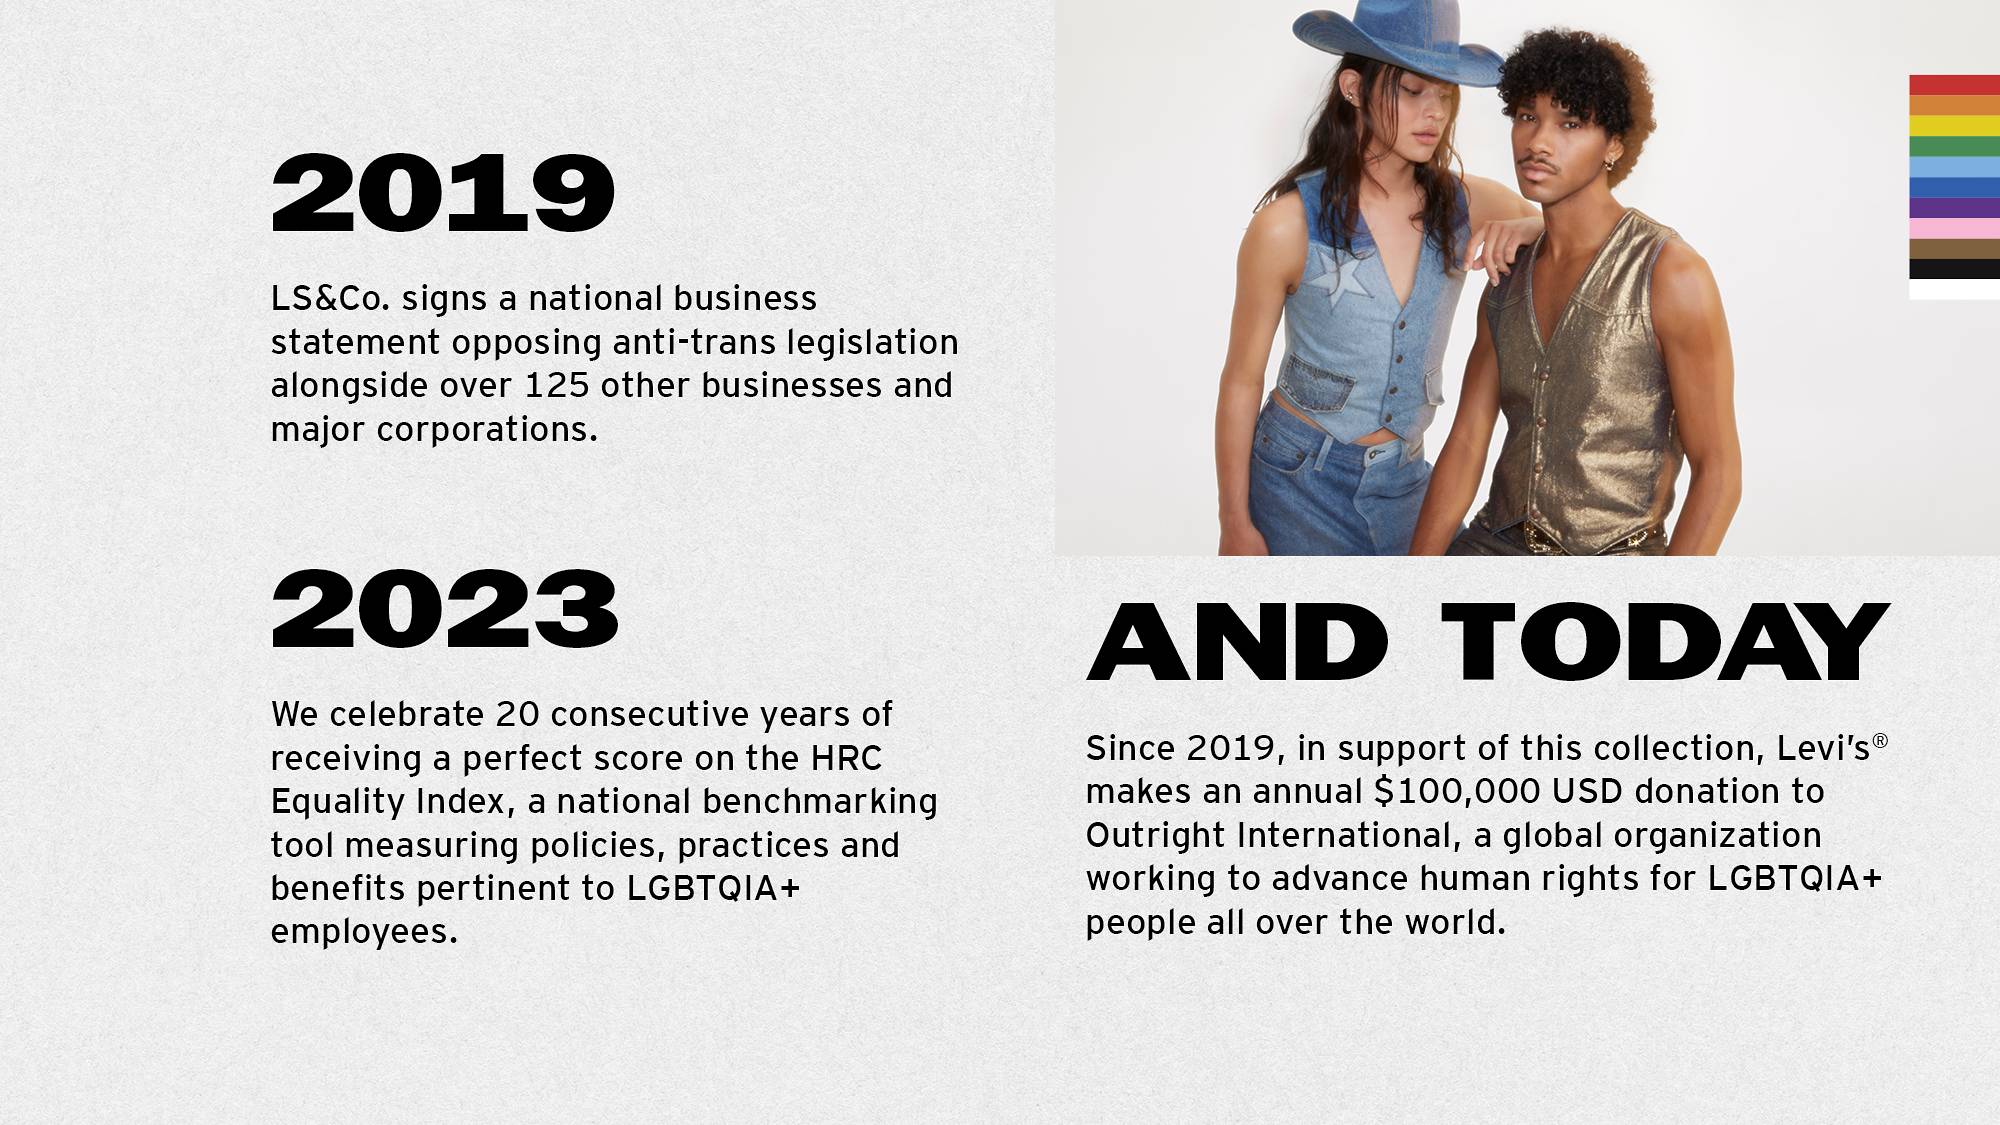 A timeline of Levi’s® support for LGBTQIA+ rights and issues.